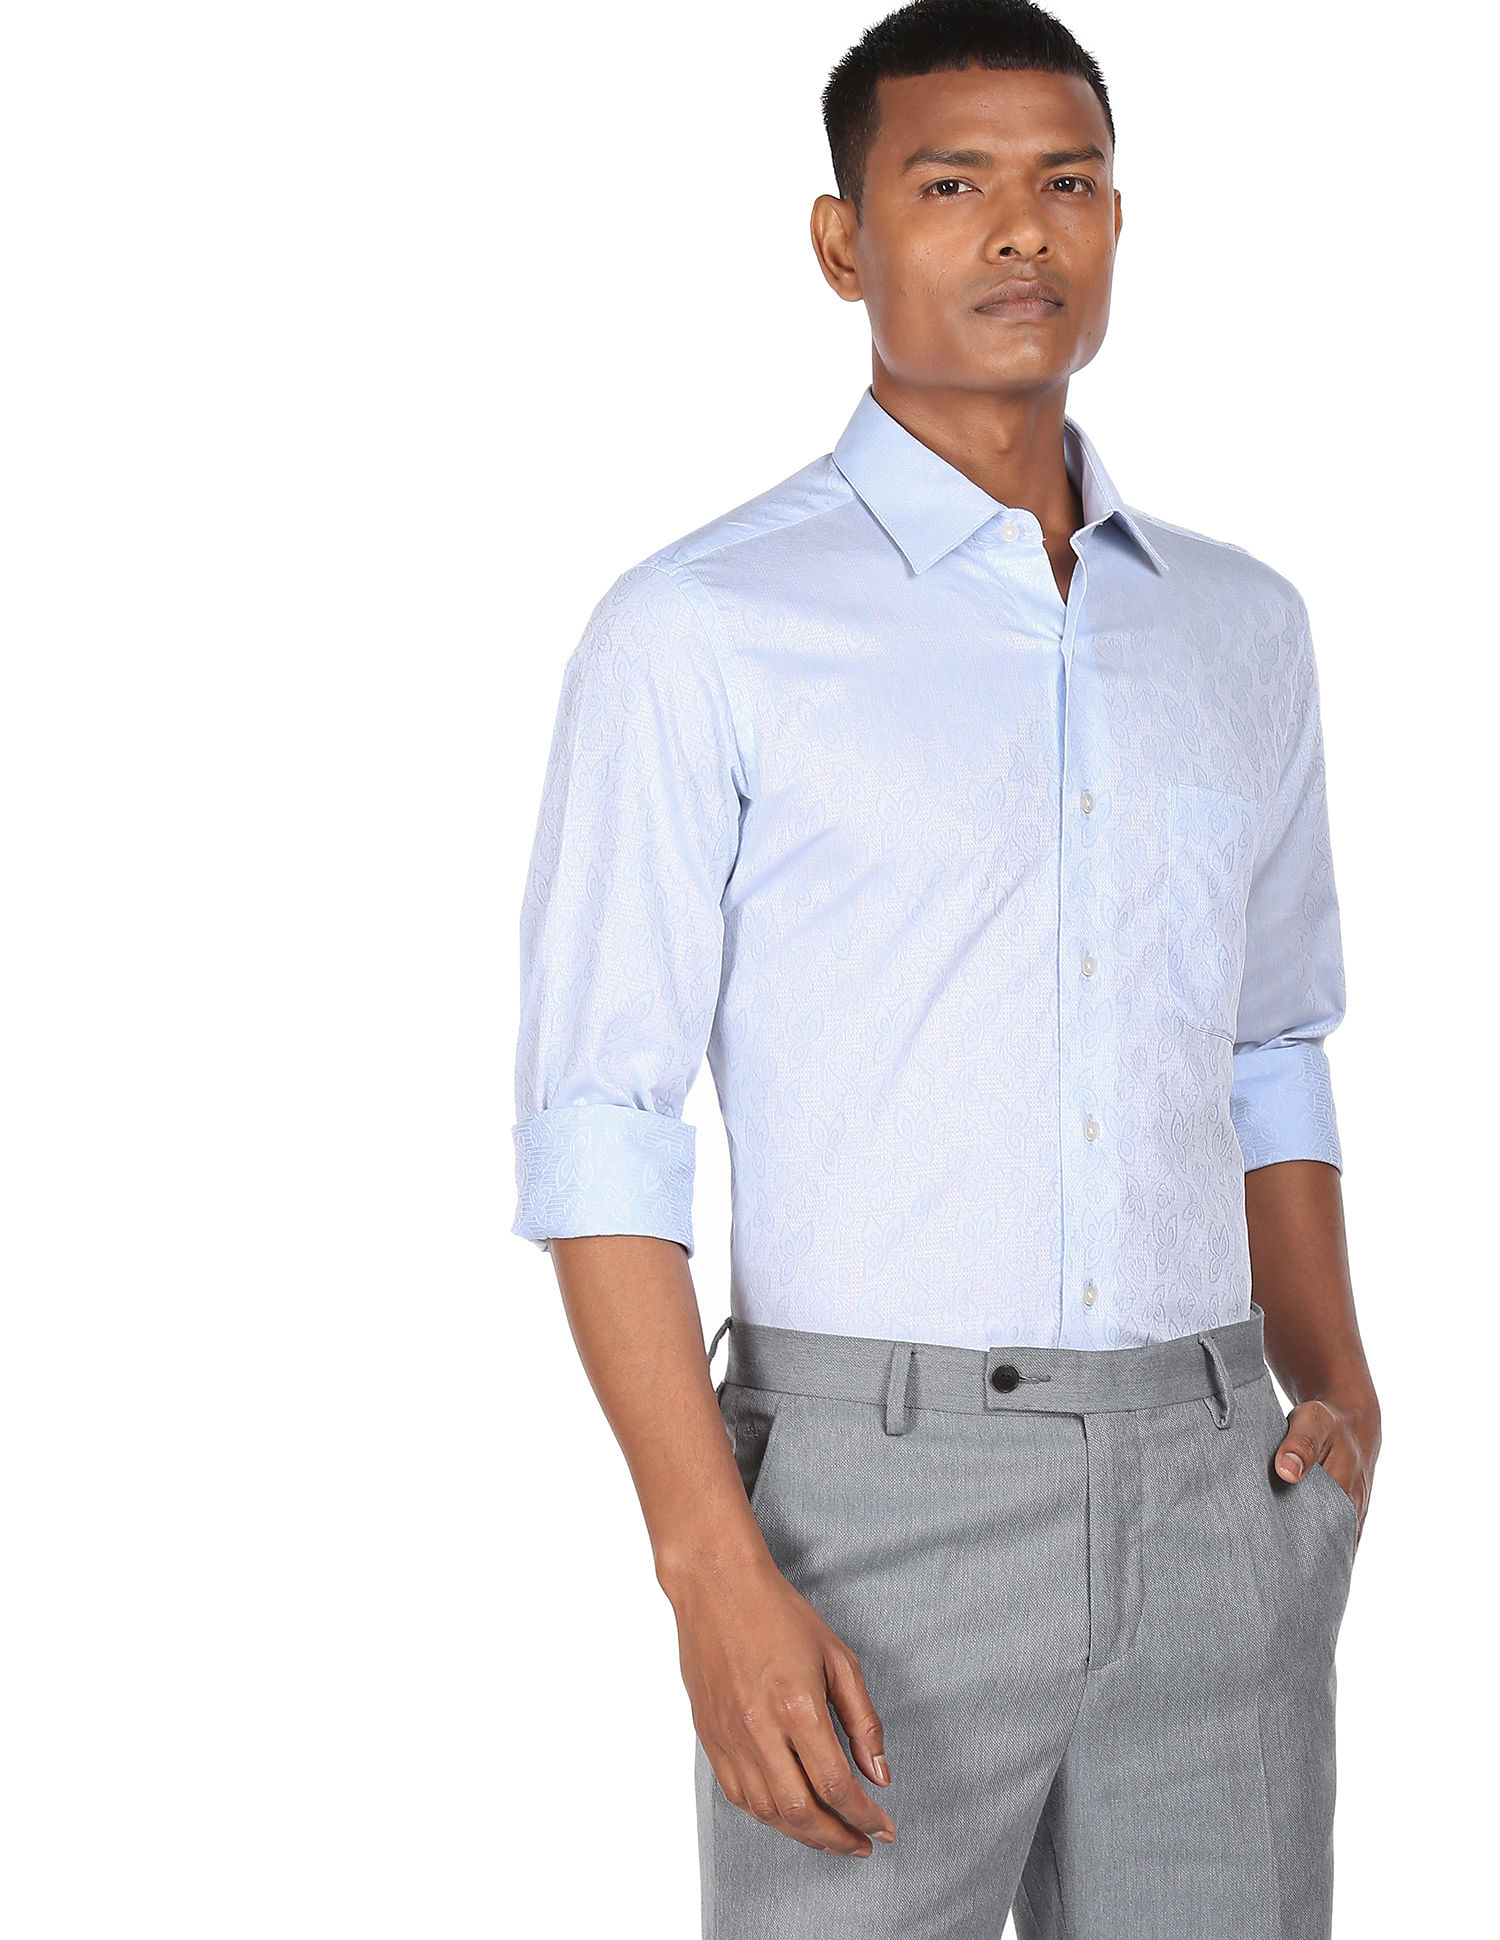 Does sky blue shirt and white pants match? - Quora